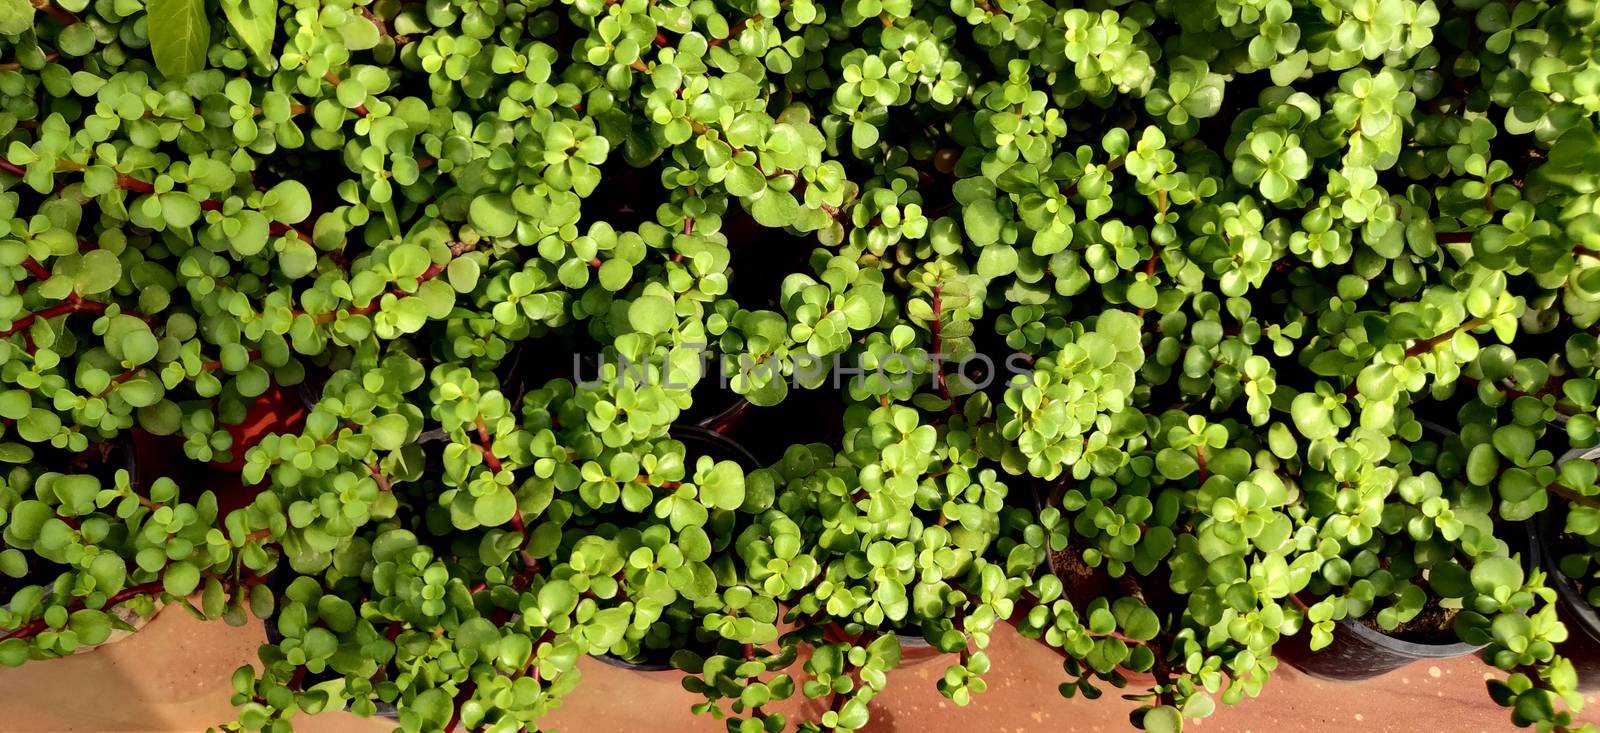 Elephant bush small leaves plant in cluster by mshivangi92